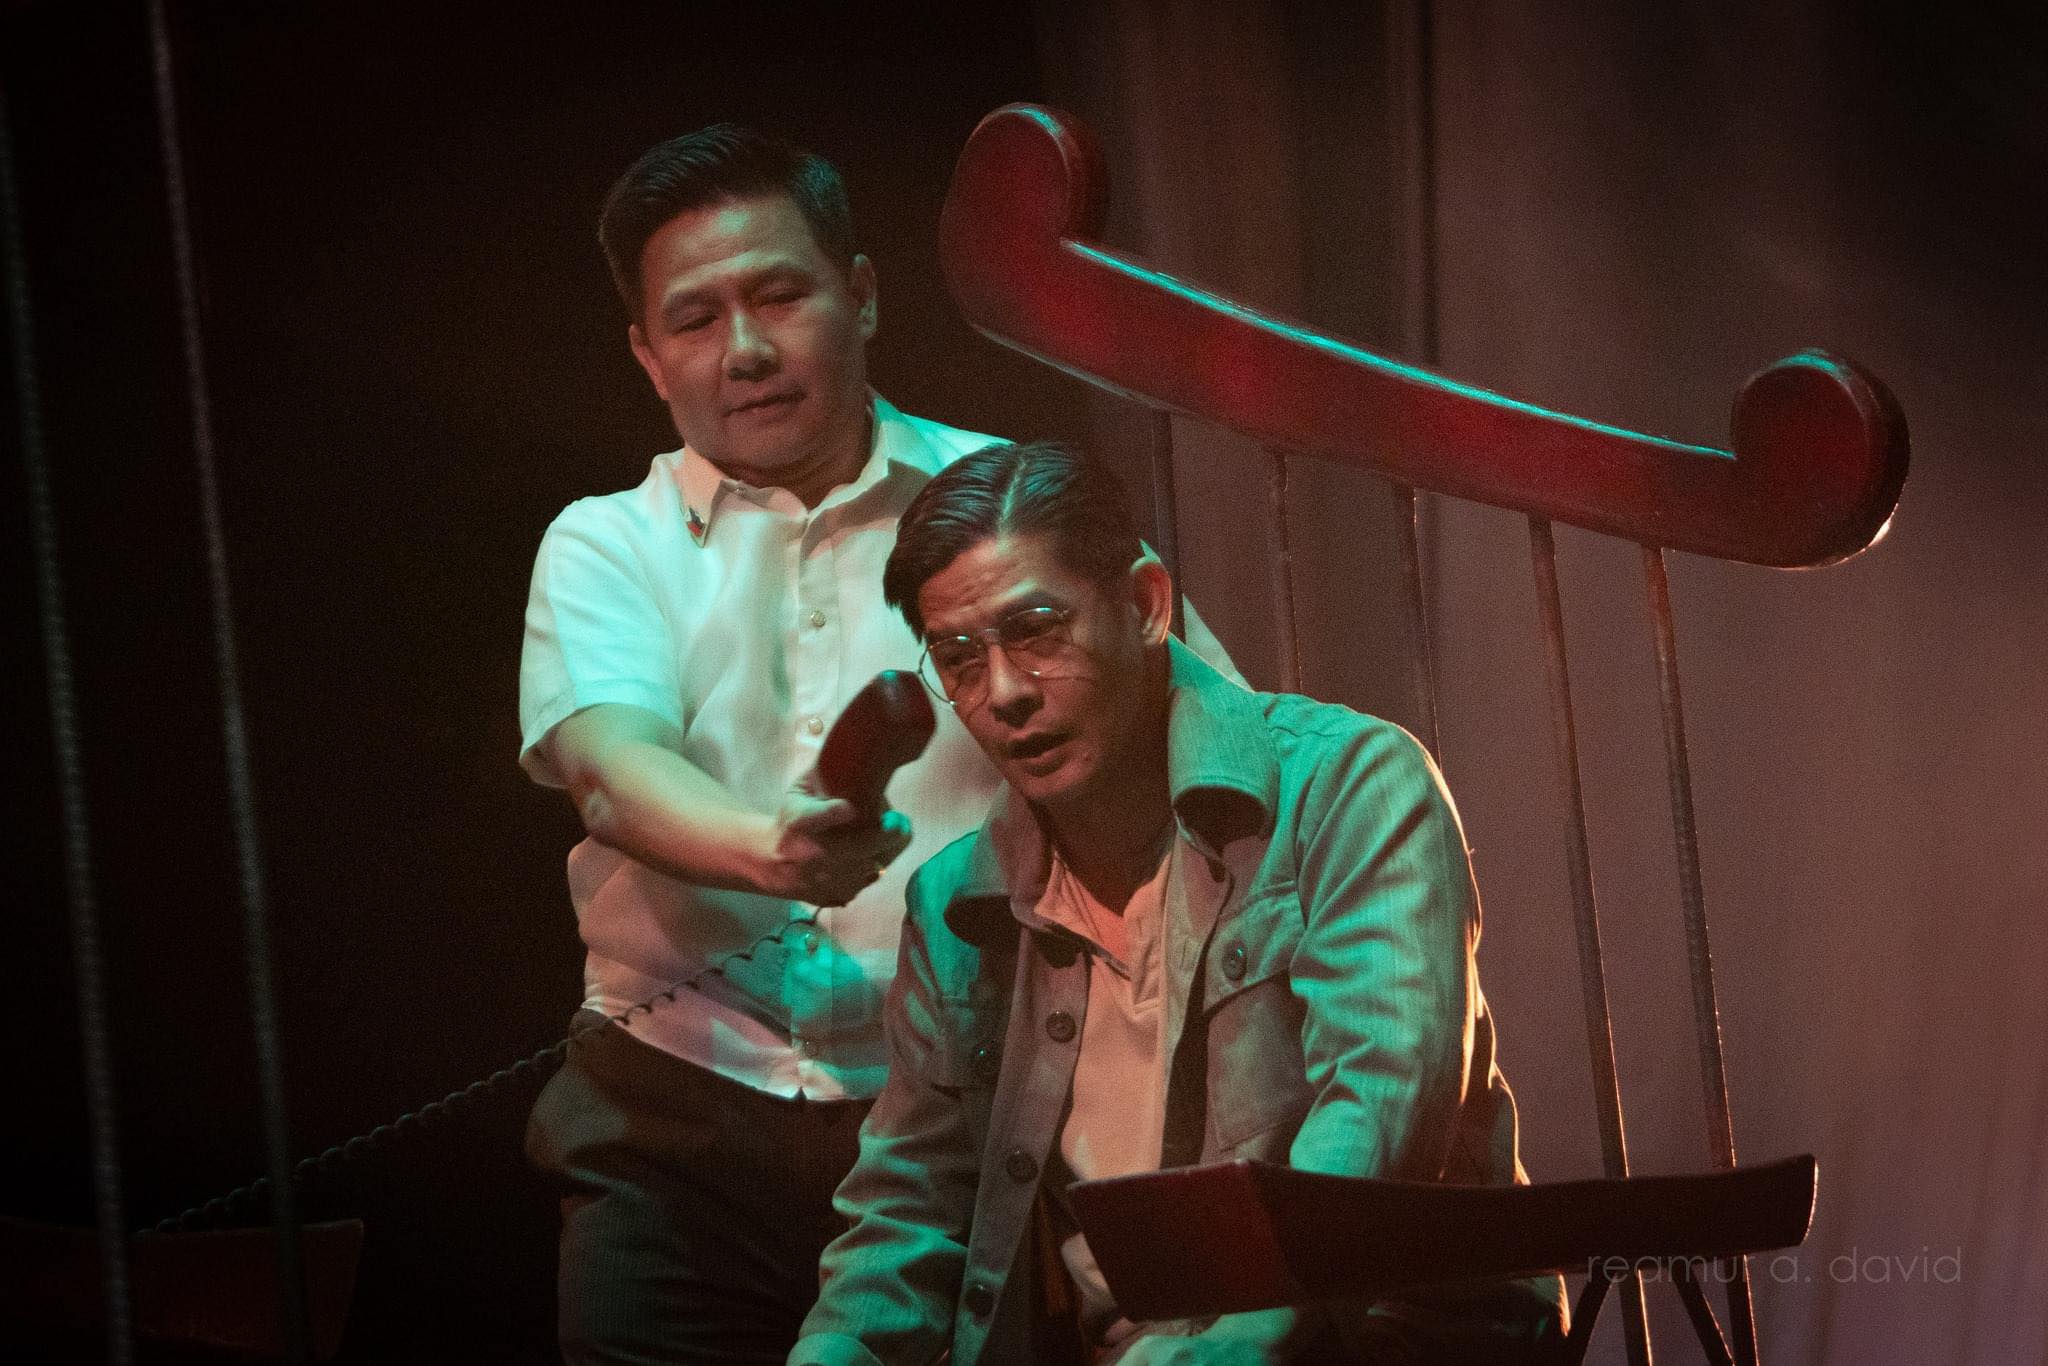 Ron Capinding as President Ferdinand Marcos Sr with Romnick Sarmenta as Benigno Aquino Jr in a scene from "The Impossible Dream"